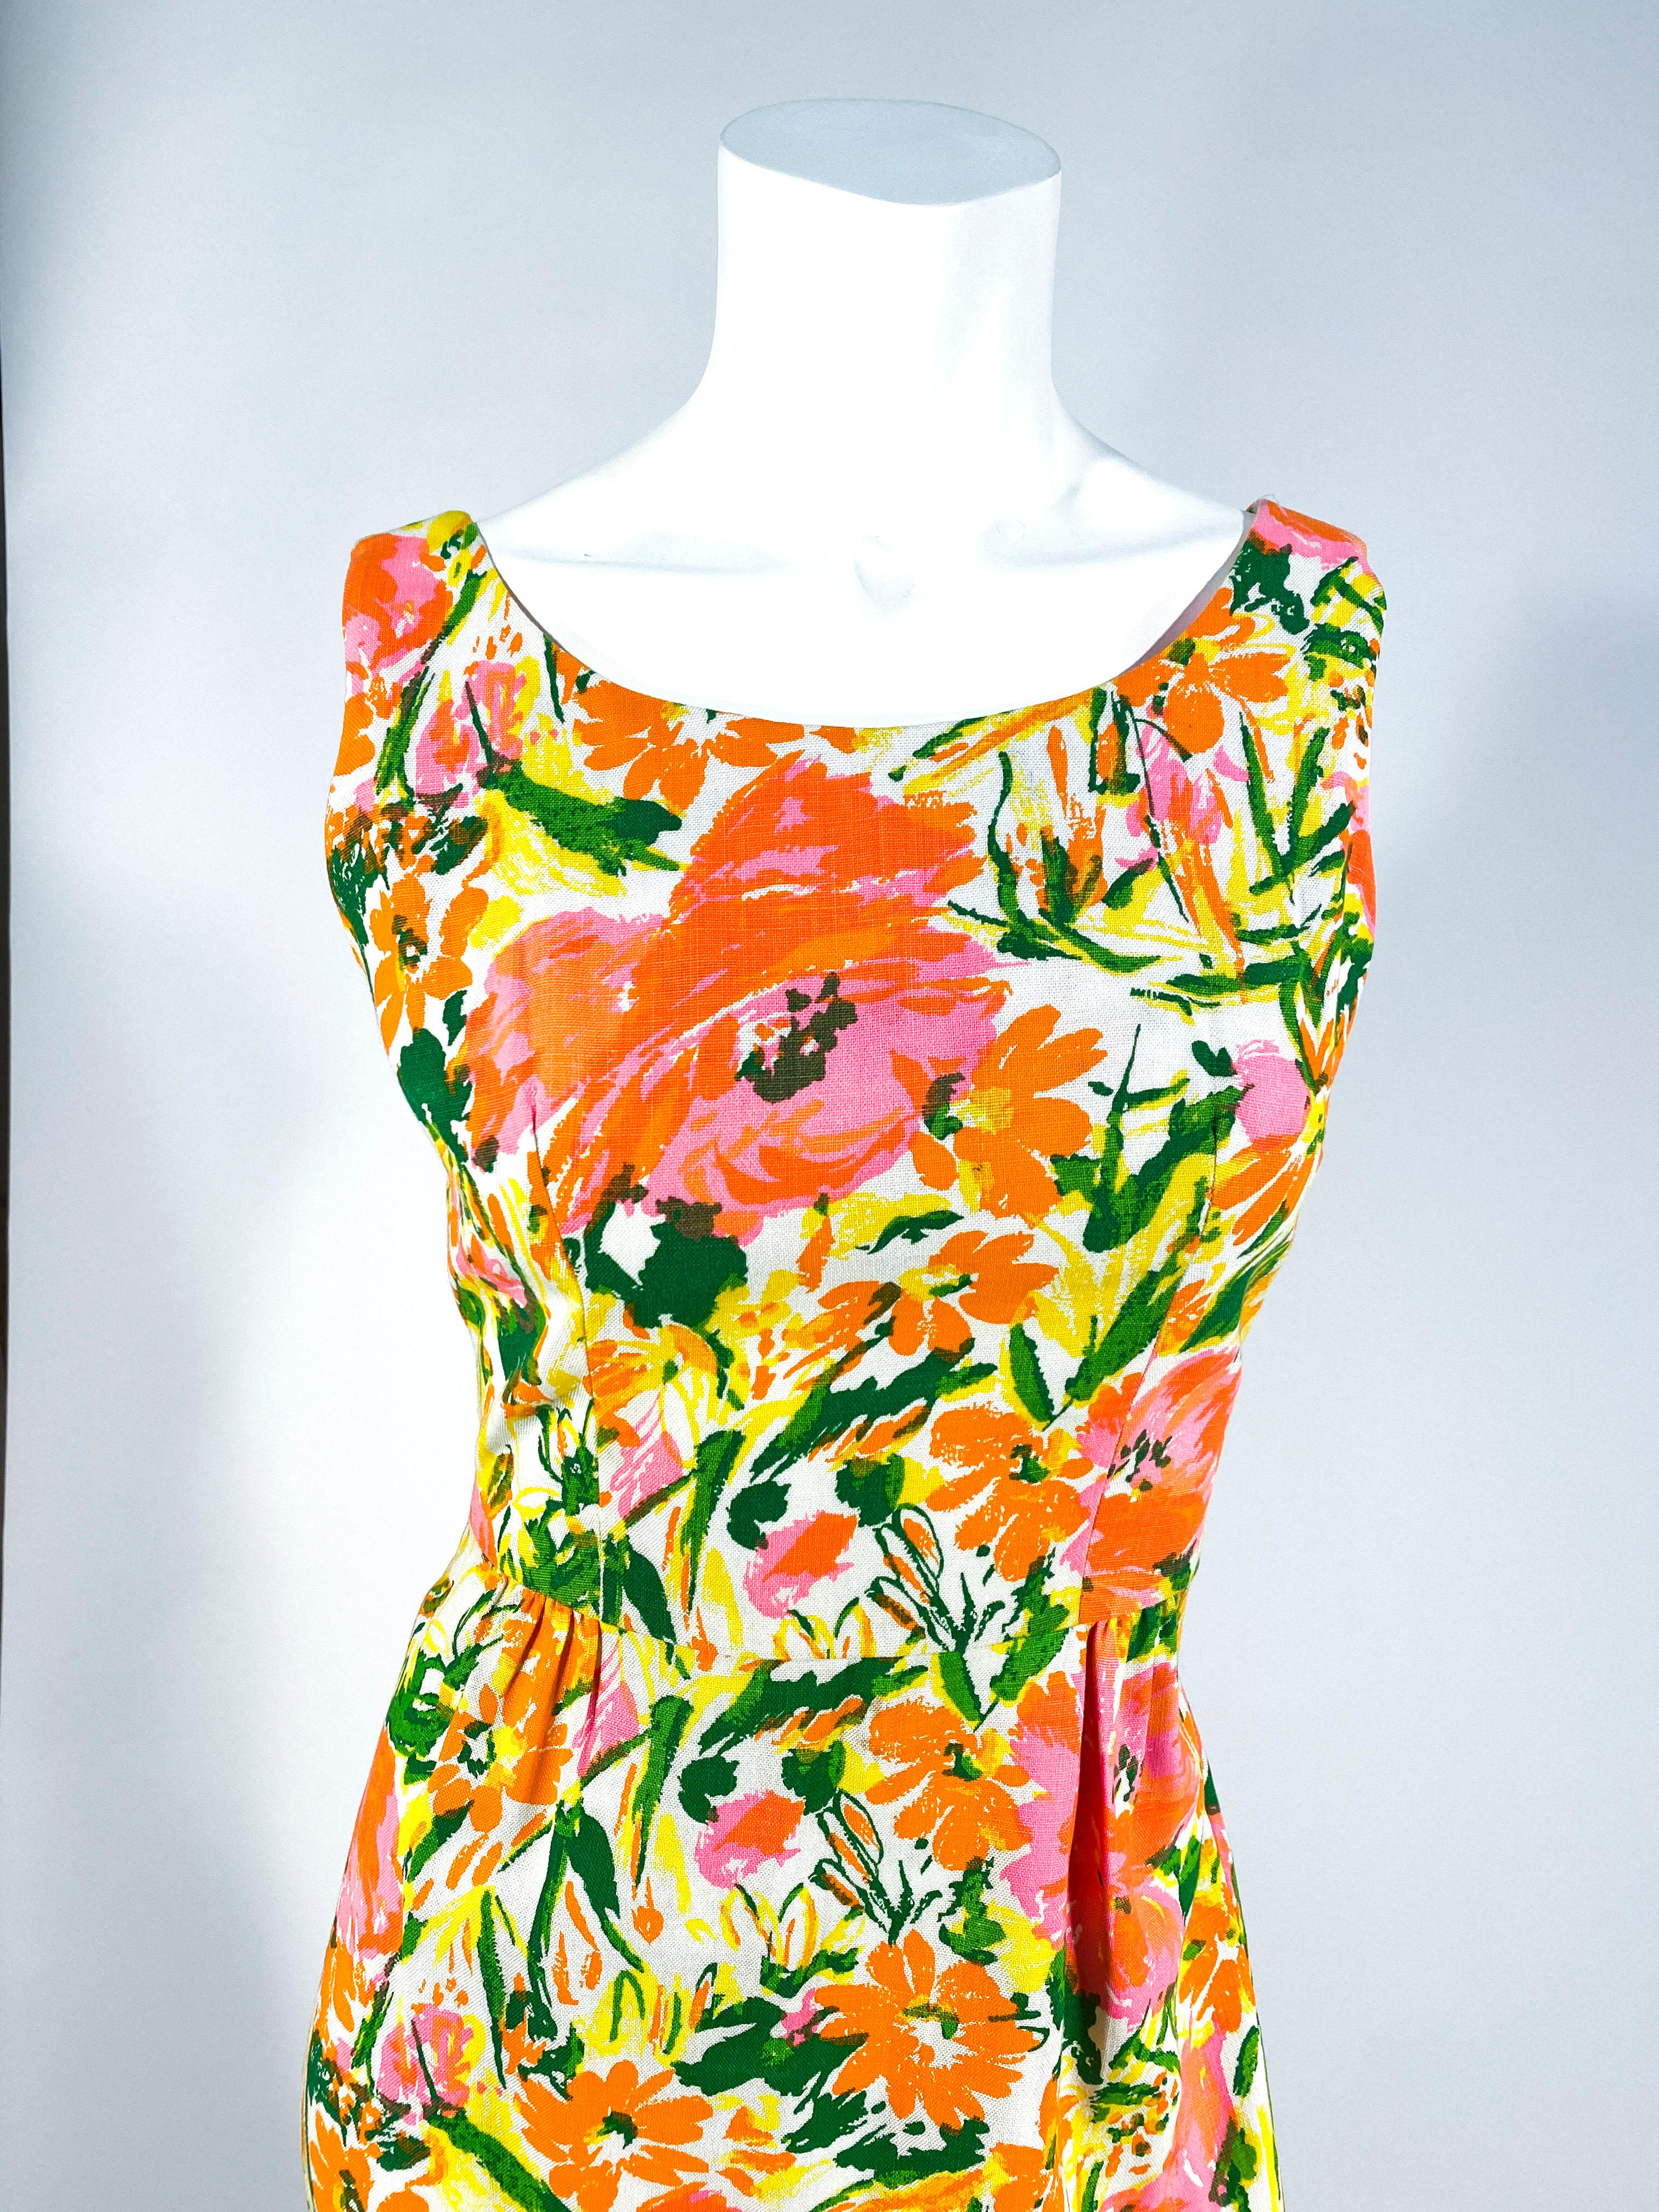 Early 1960s cotton day dress featuring a neon floral abstract print. The bodice tapers into the waist that is cinched connecting to the moderately pleated skirt for a nice silhouette. This piece is unlined with a metal zipper back closure. 